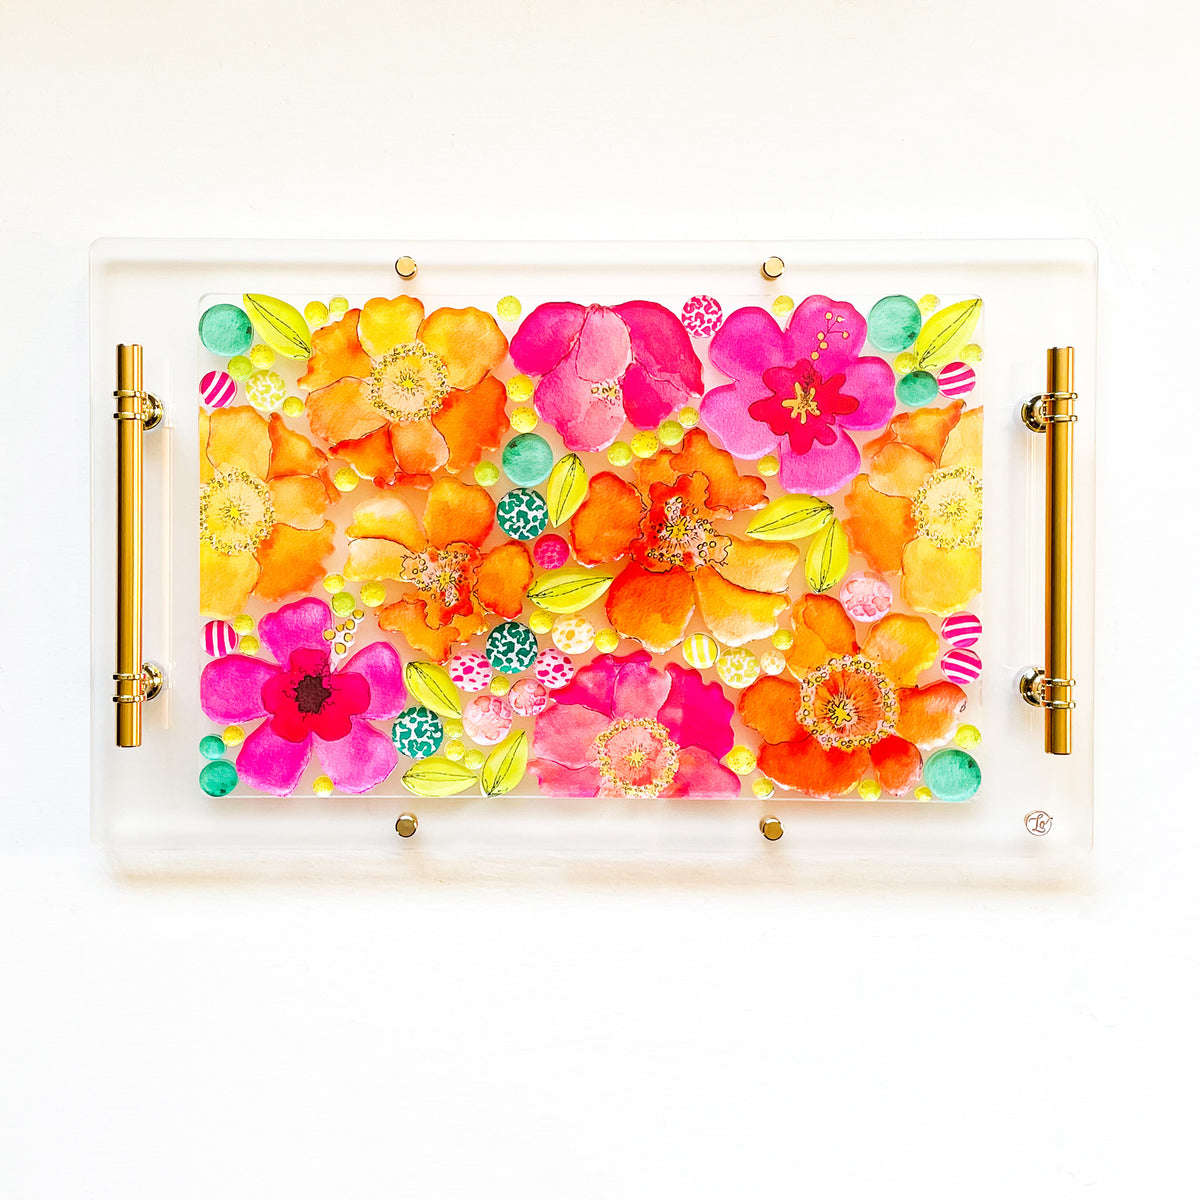 THE OBSESSION Acrylic Tray: DULANEY